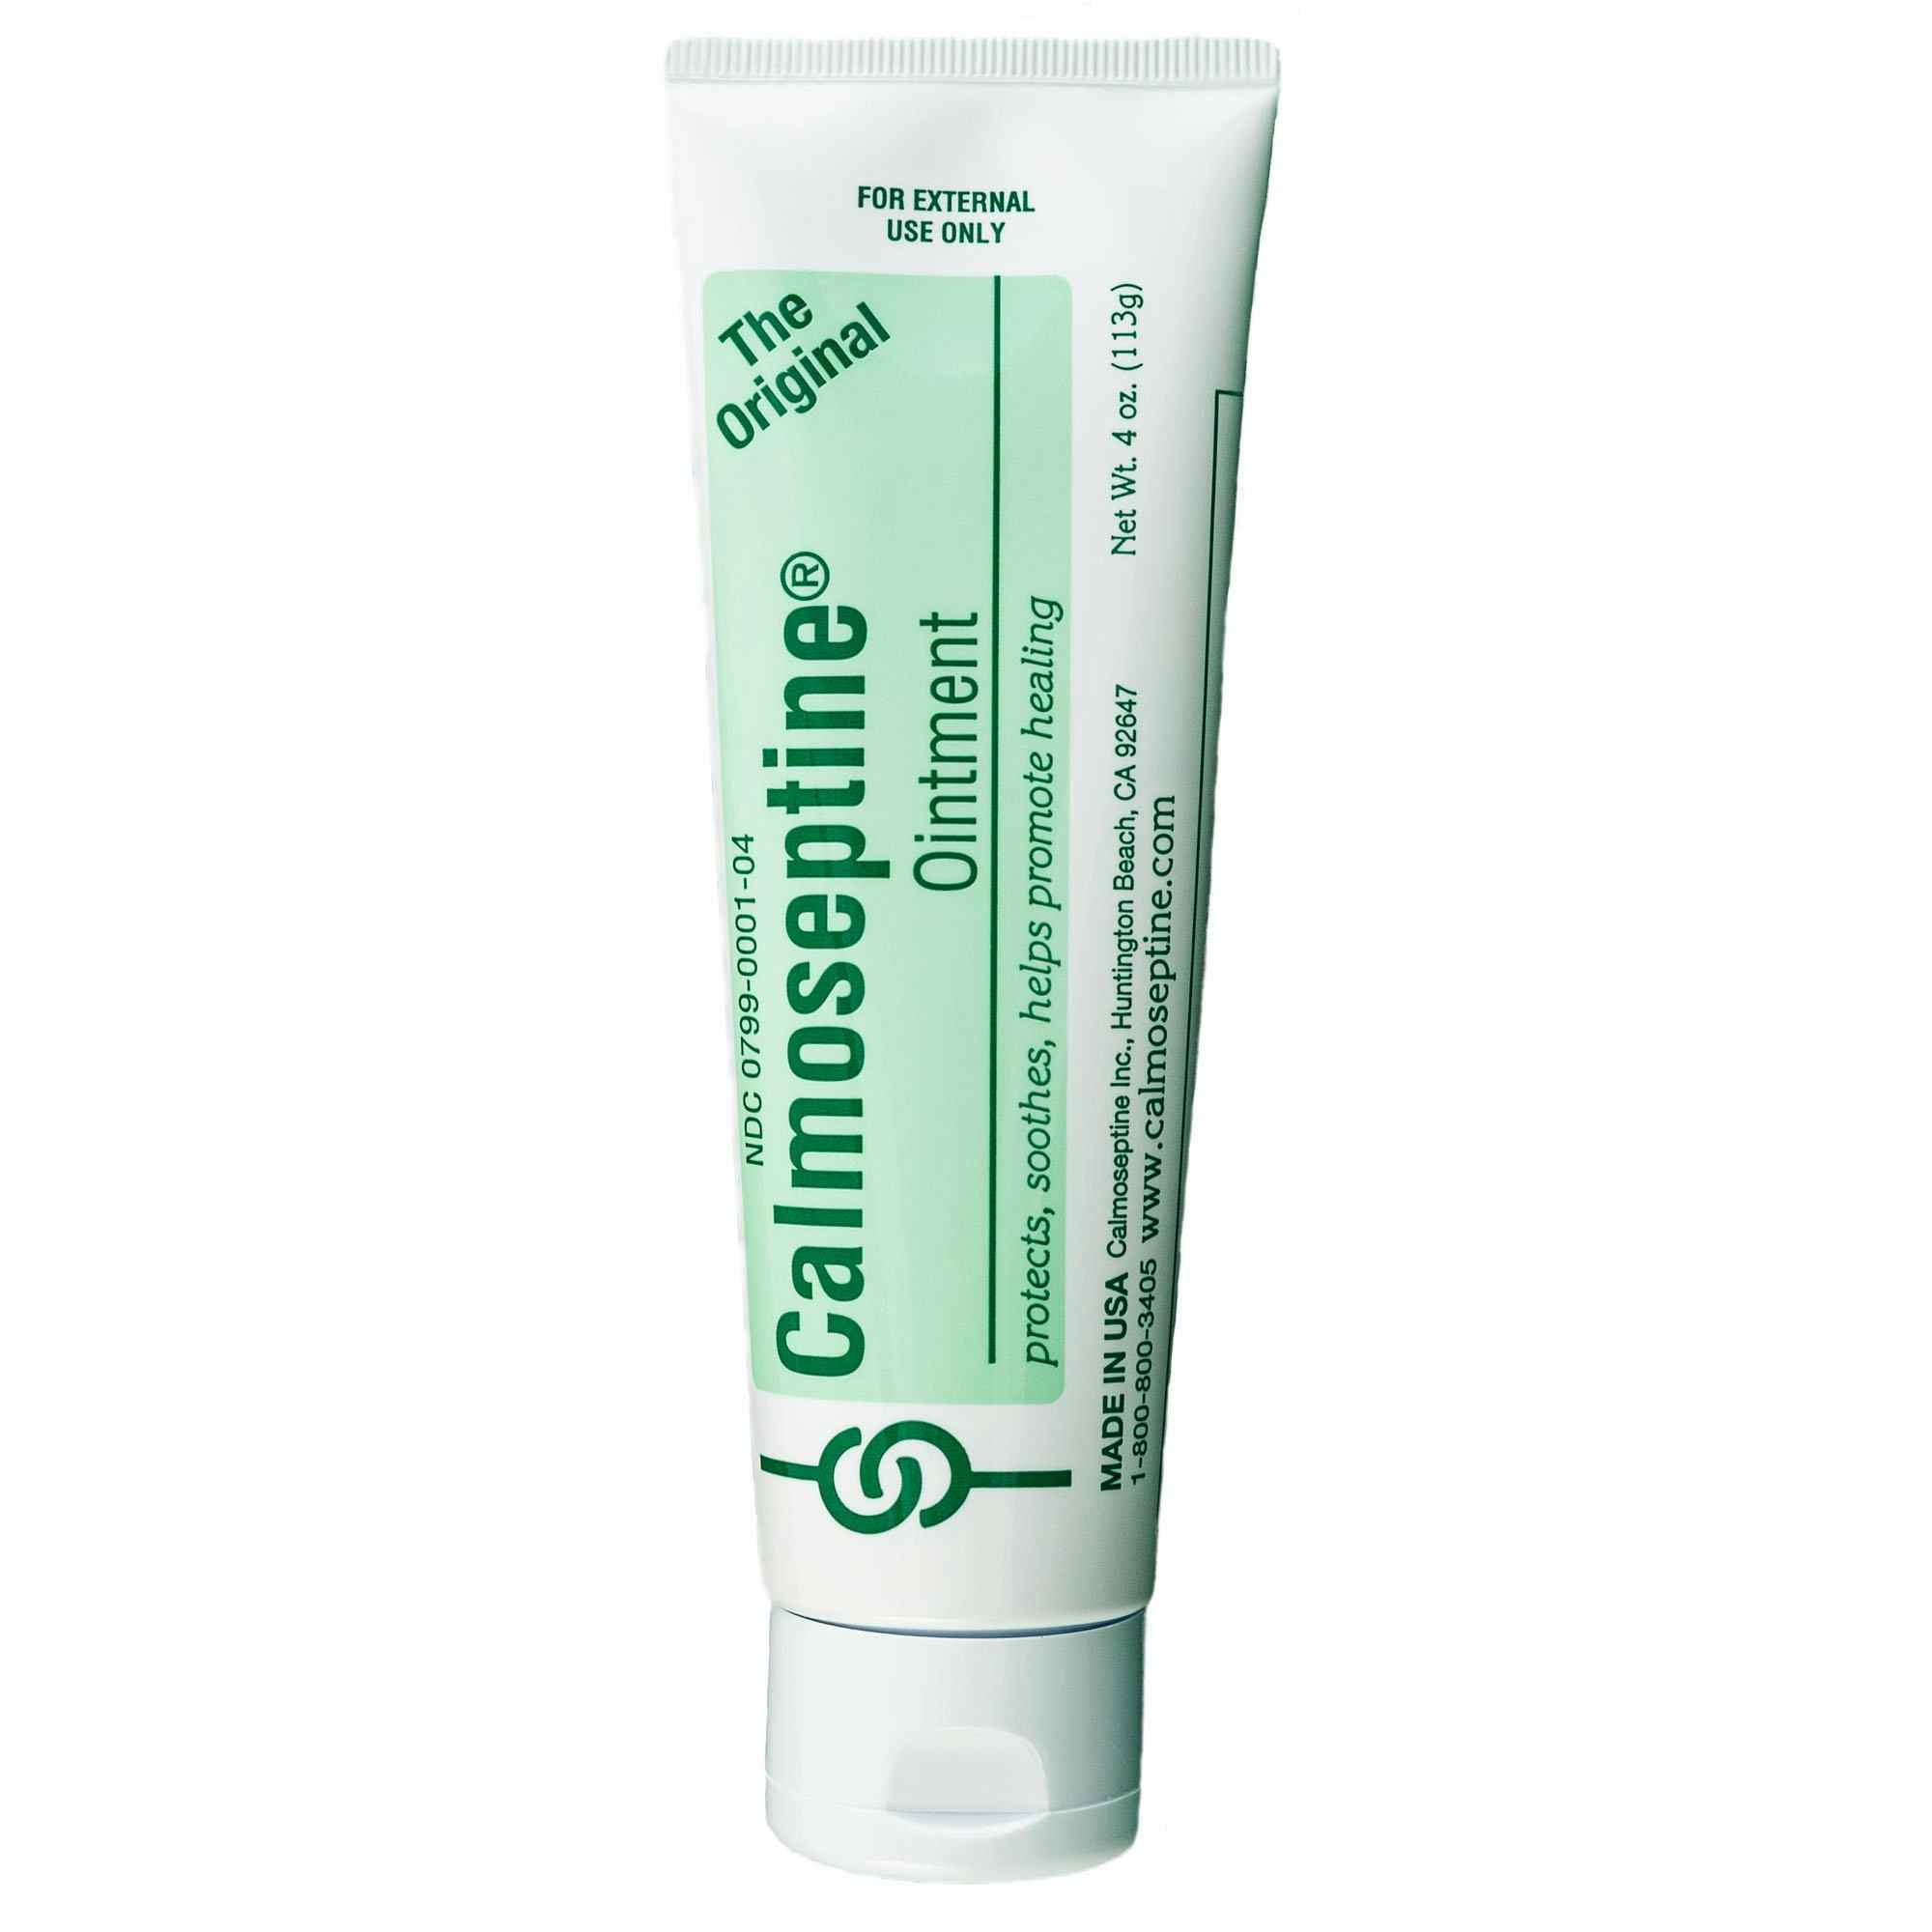 Calmoseptine Ointment, Skin Protectant